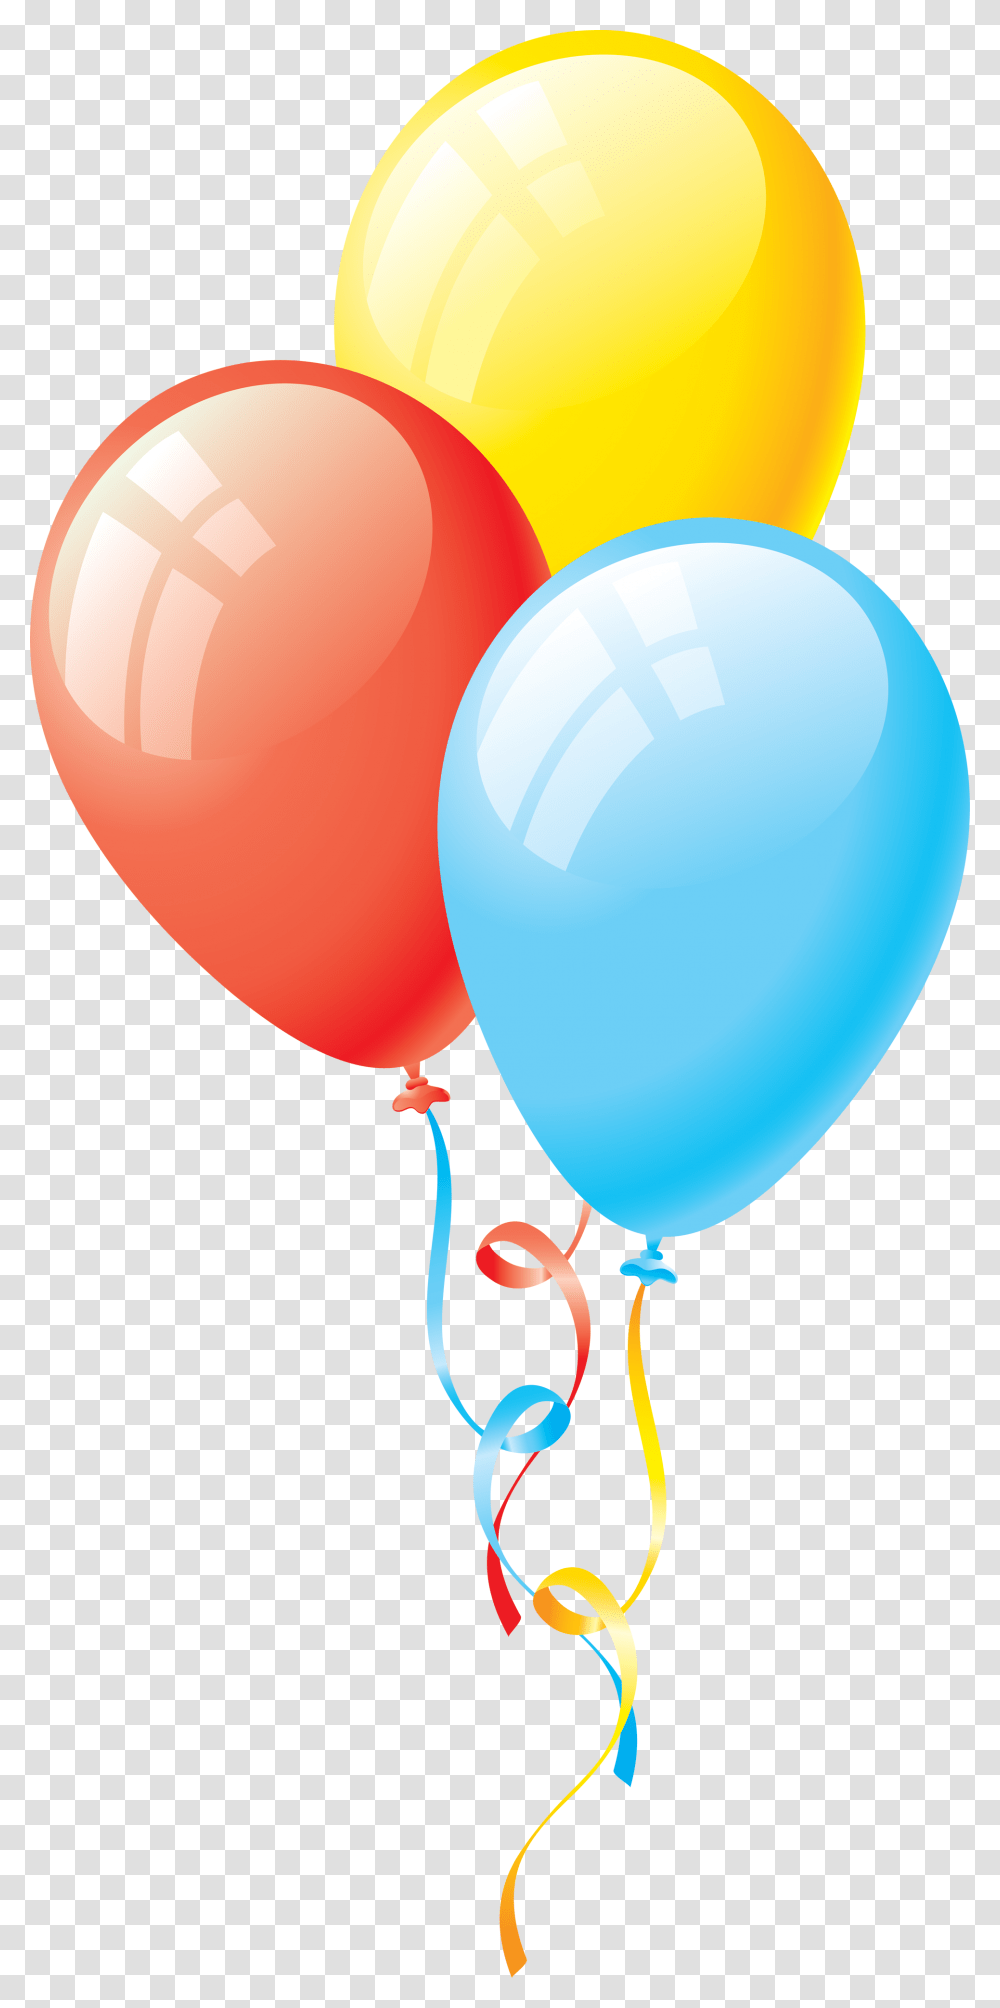 Colorful Balloon Image Free Download Balloons Transparent Png